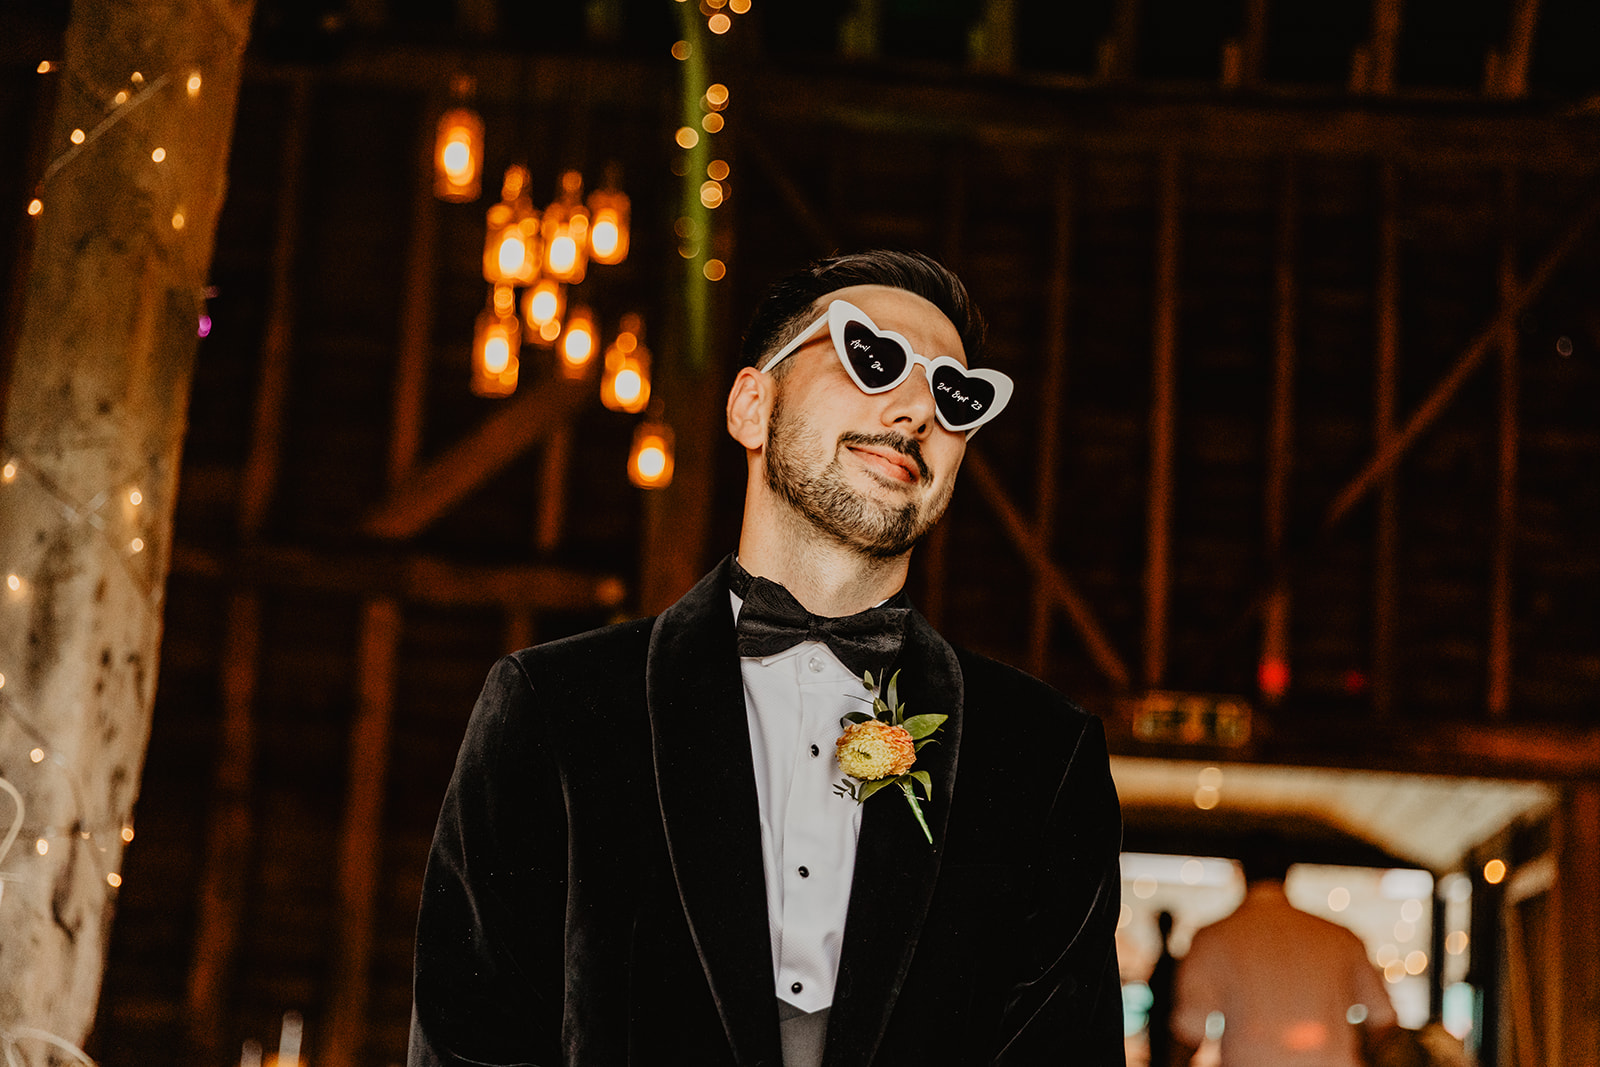 Groom with sunglasses at a Southlands barn wedding, Sussex. Photo by OliveJoy Photography.